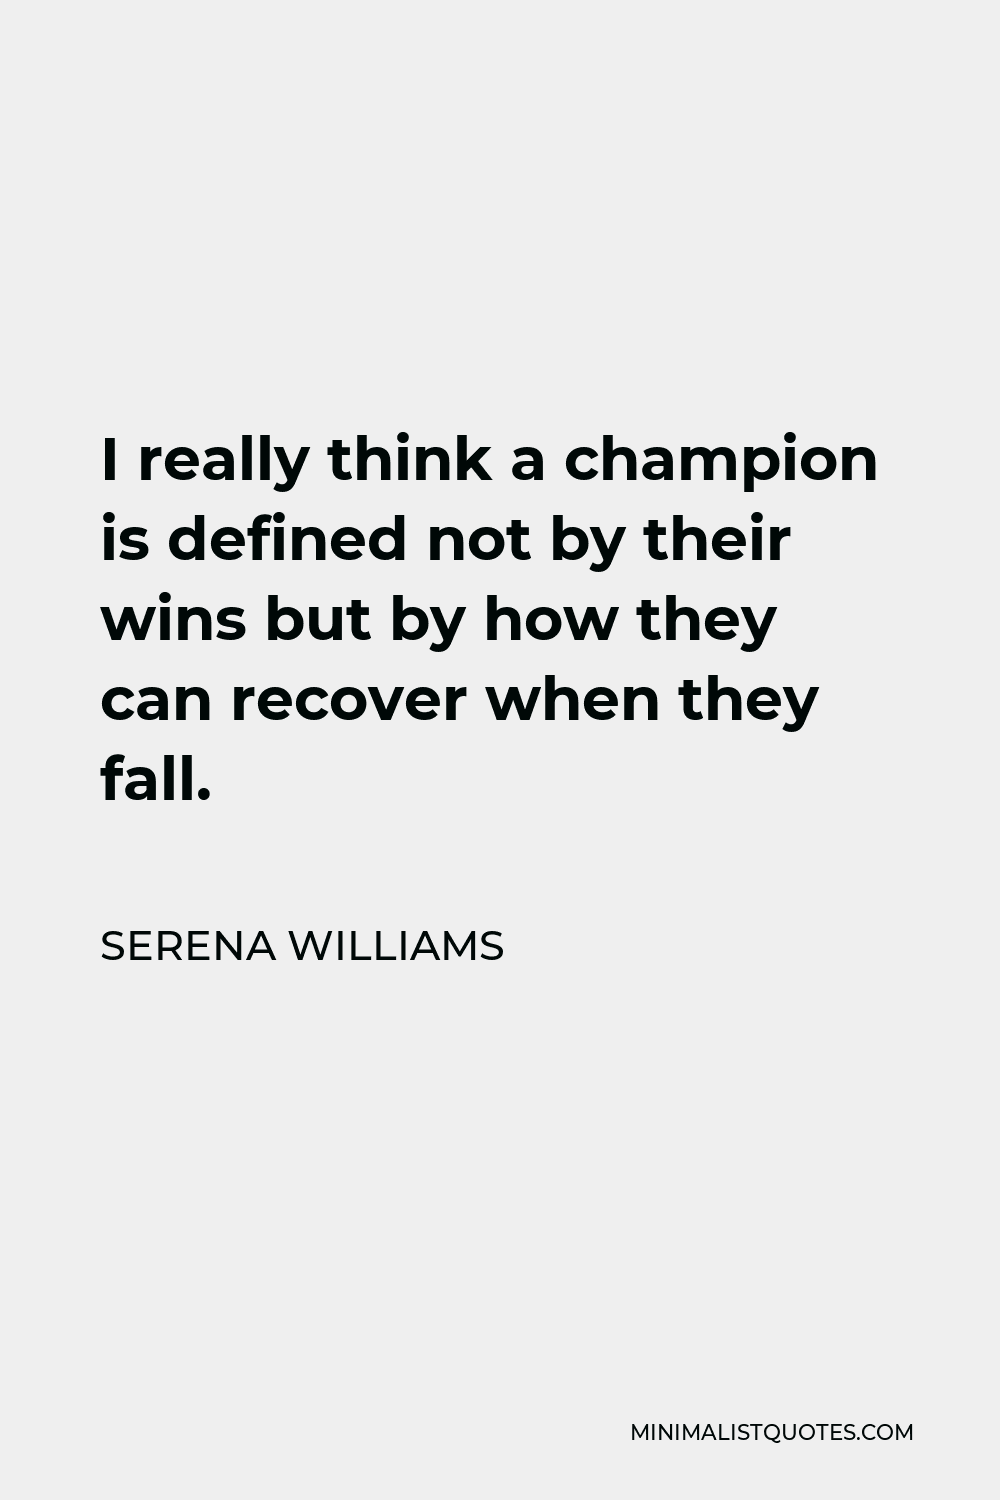 Serena Williams Quote - I really think a champion is defined not by their wins but by how they can recover when they fall.